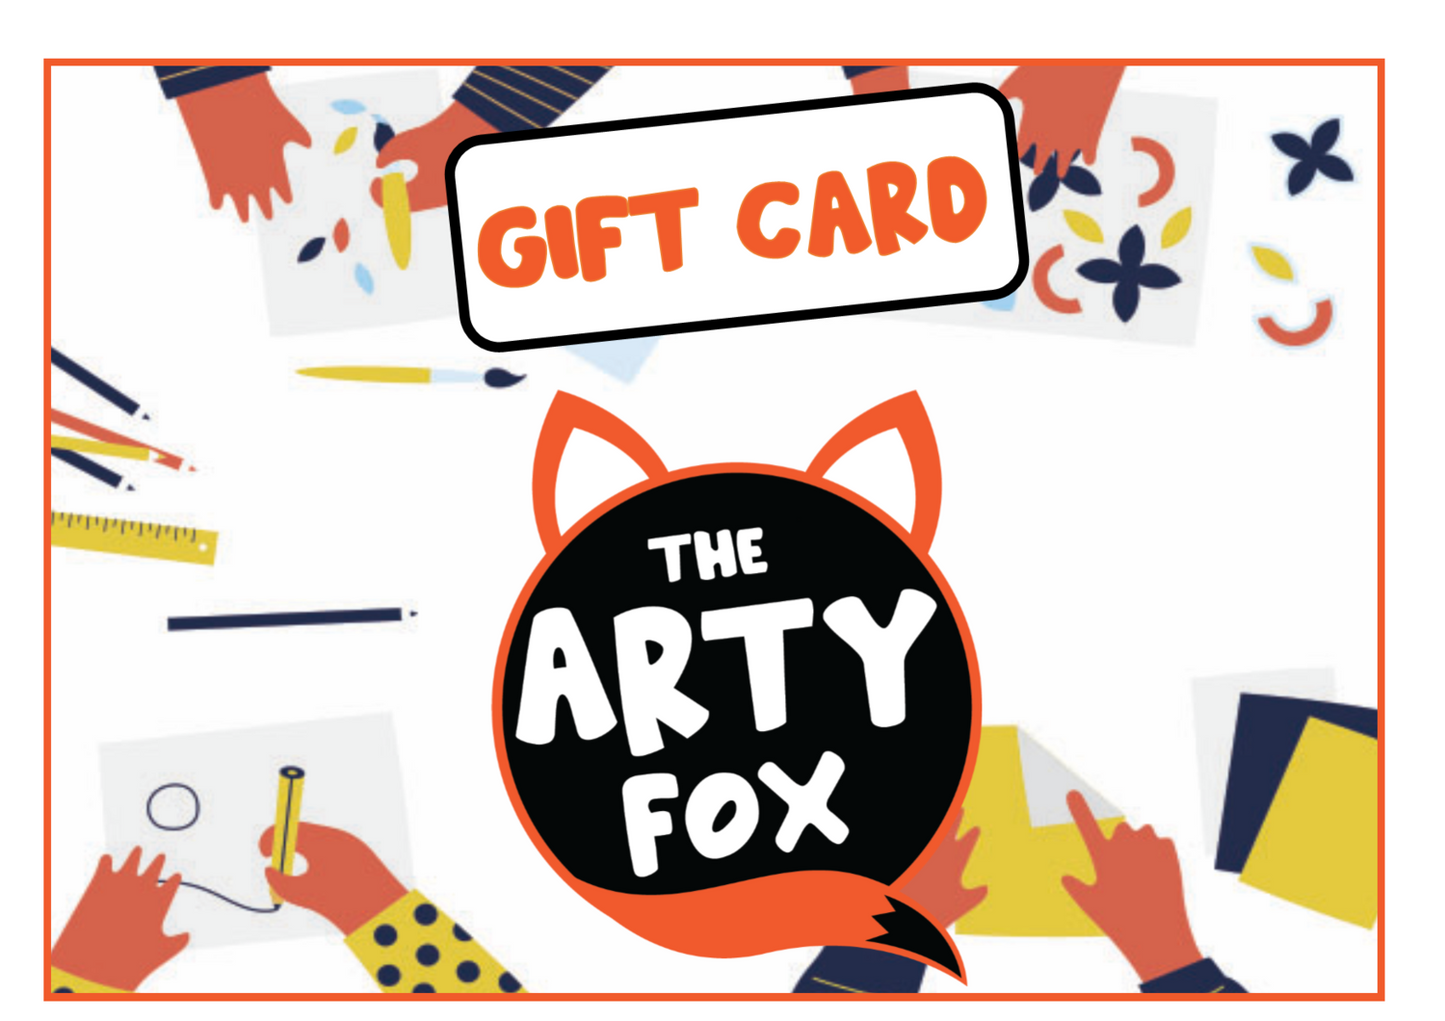 The Arty Fox Gift Card